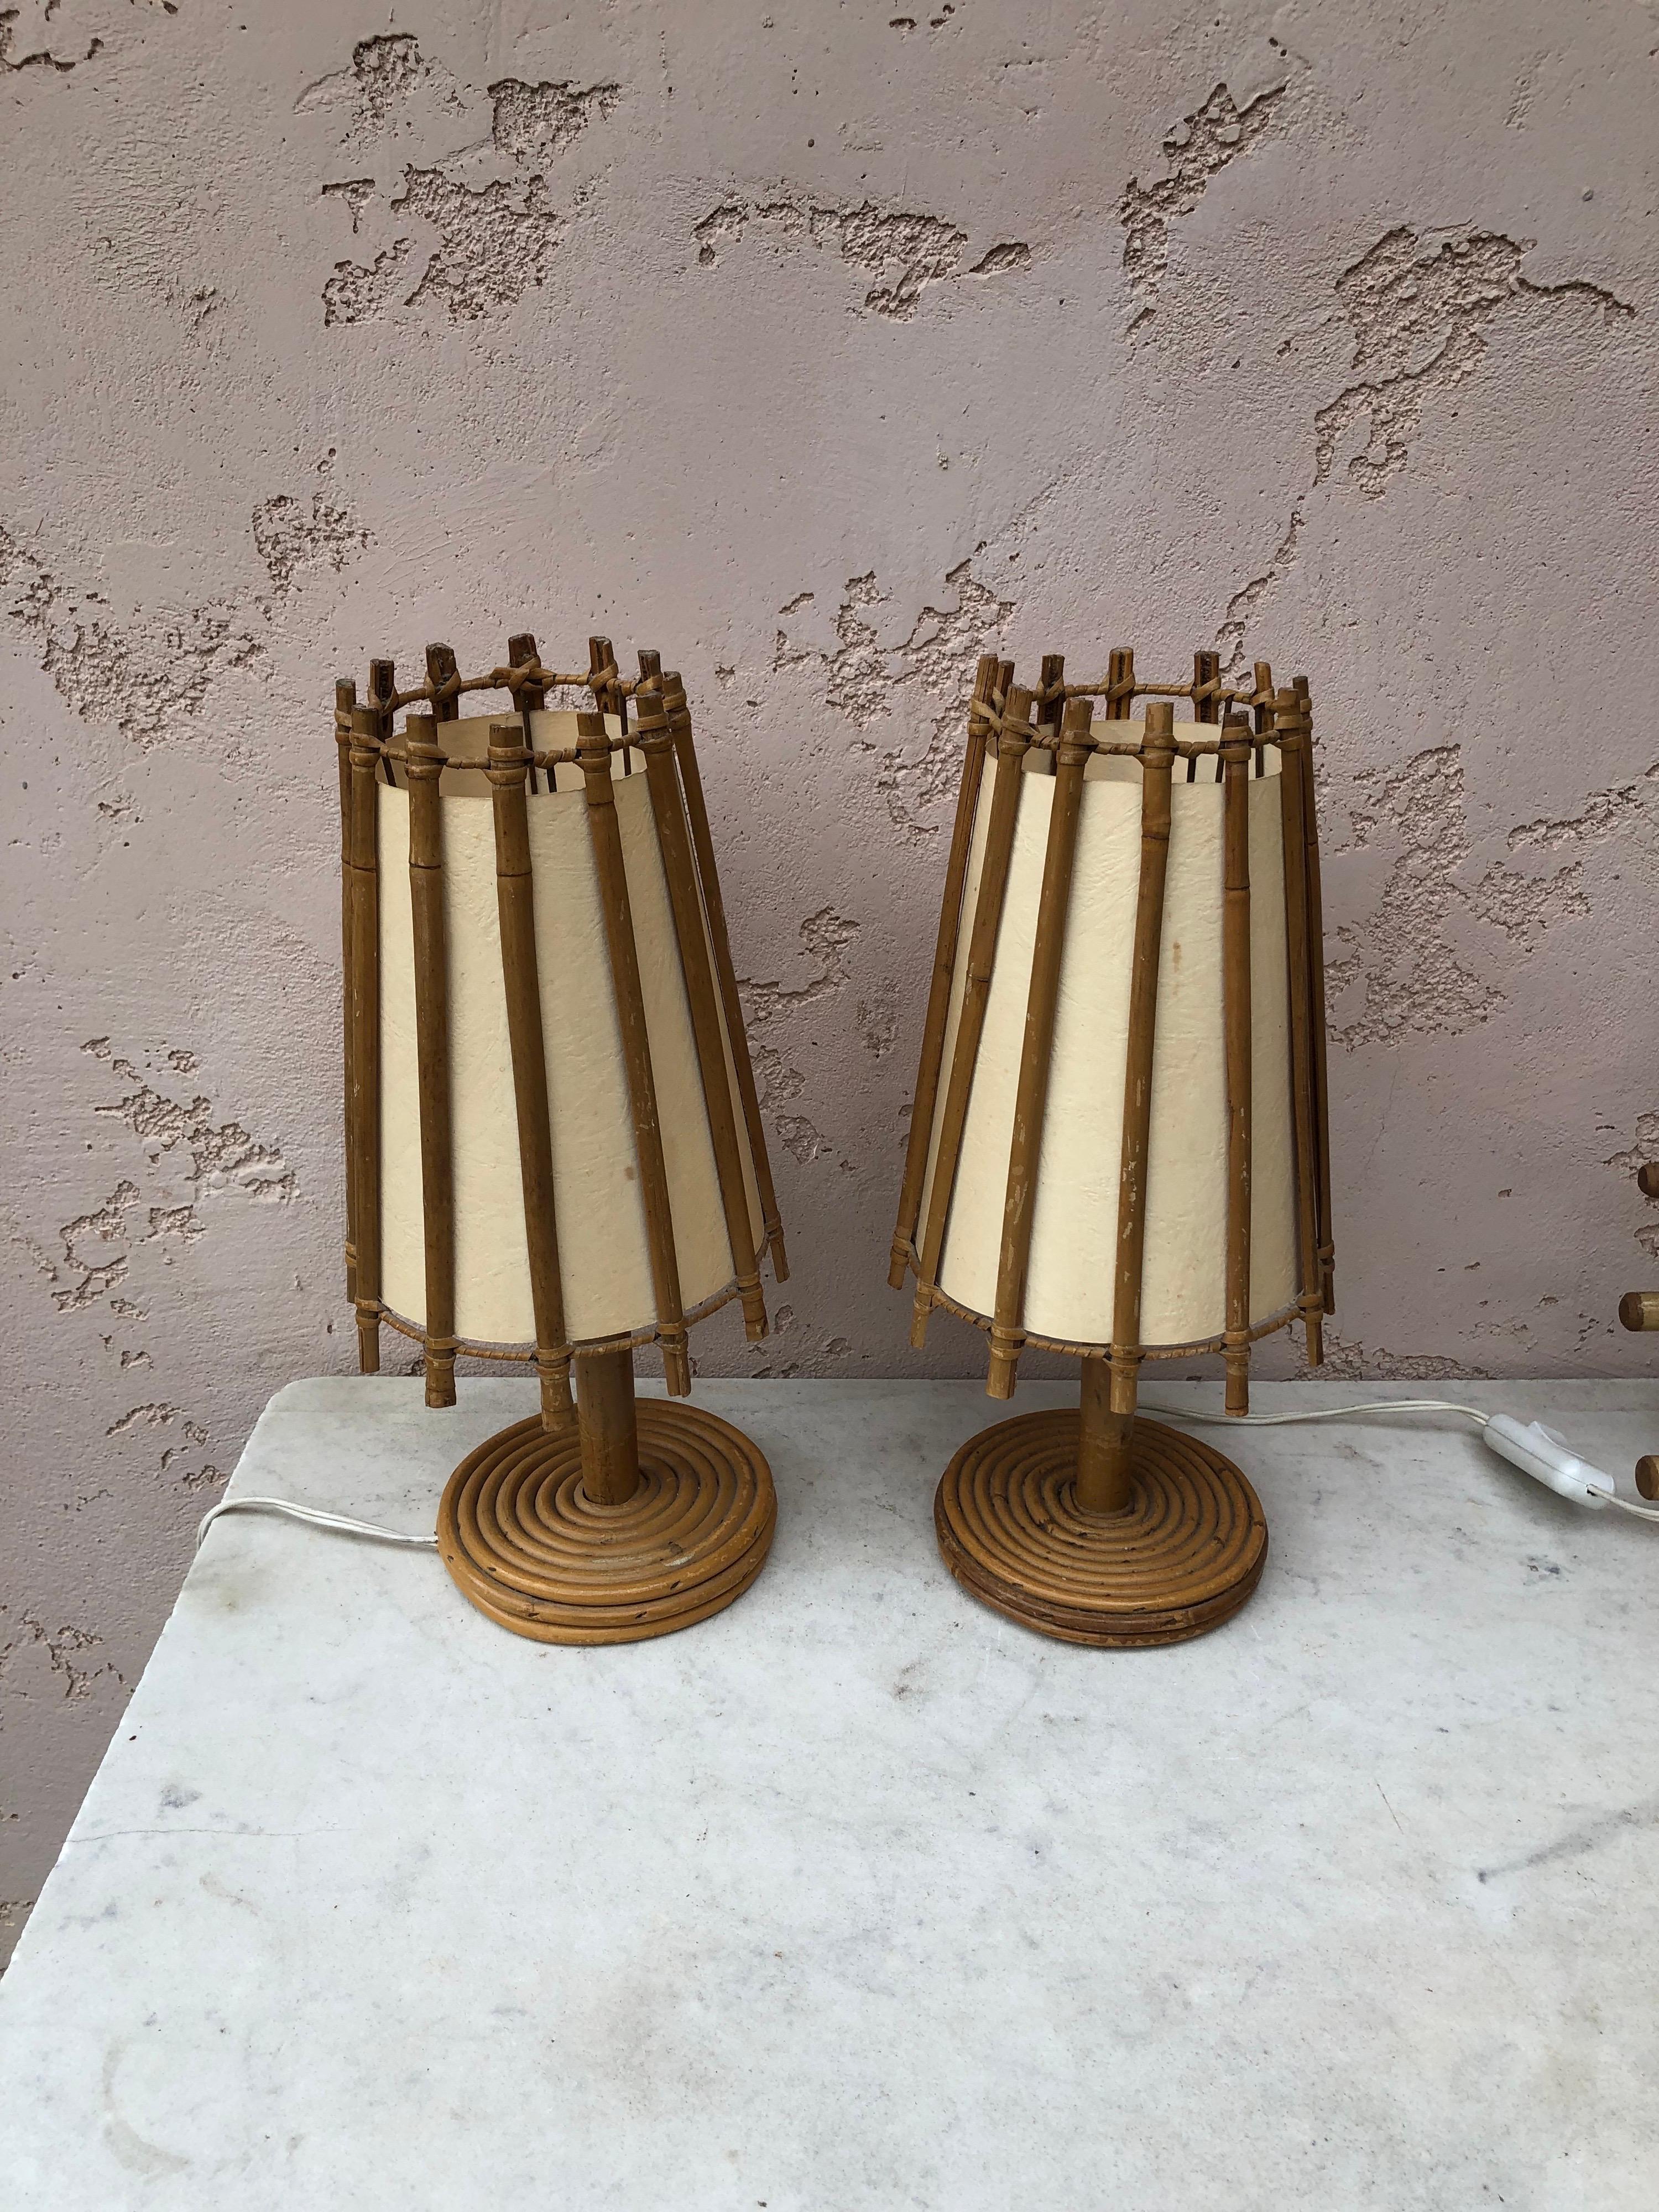 Pair of French rattan lamps Louis Sognot, circa 1950.
Measures: height / 13.5 inches.
Diameter / 6.5 inches.